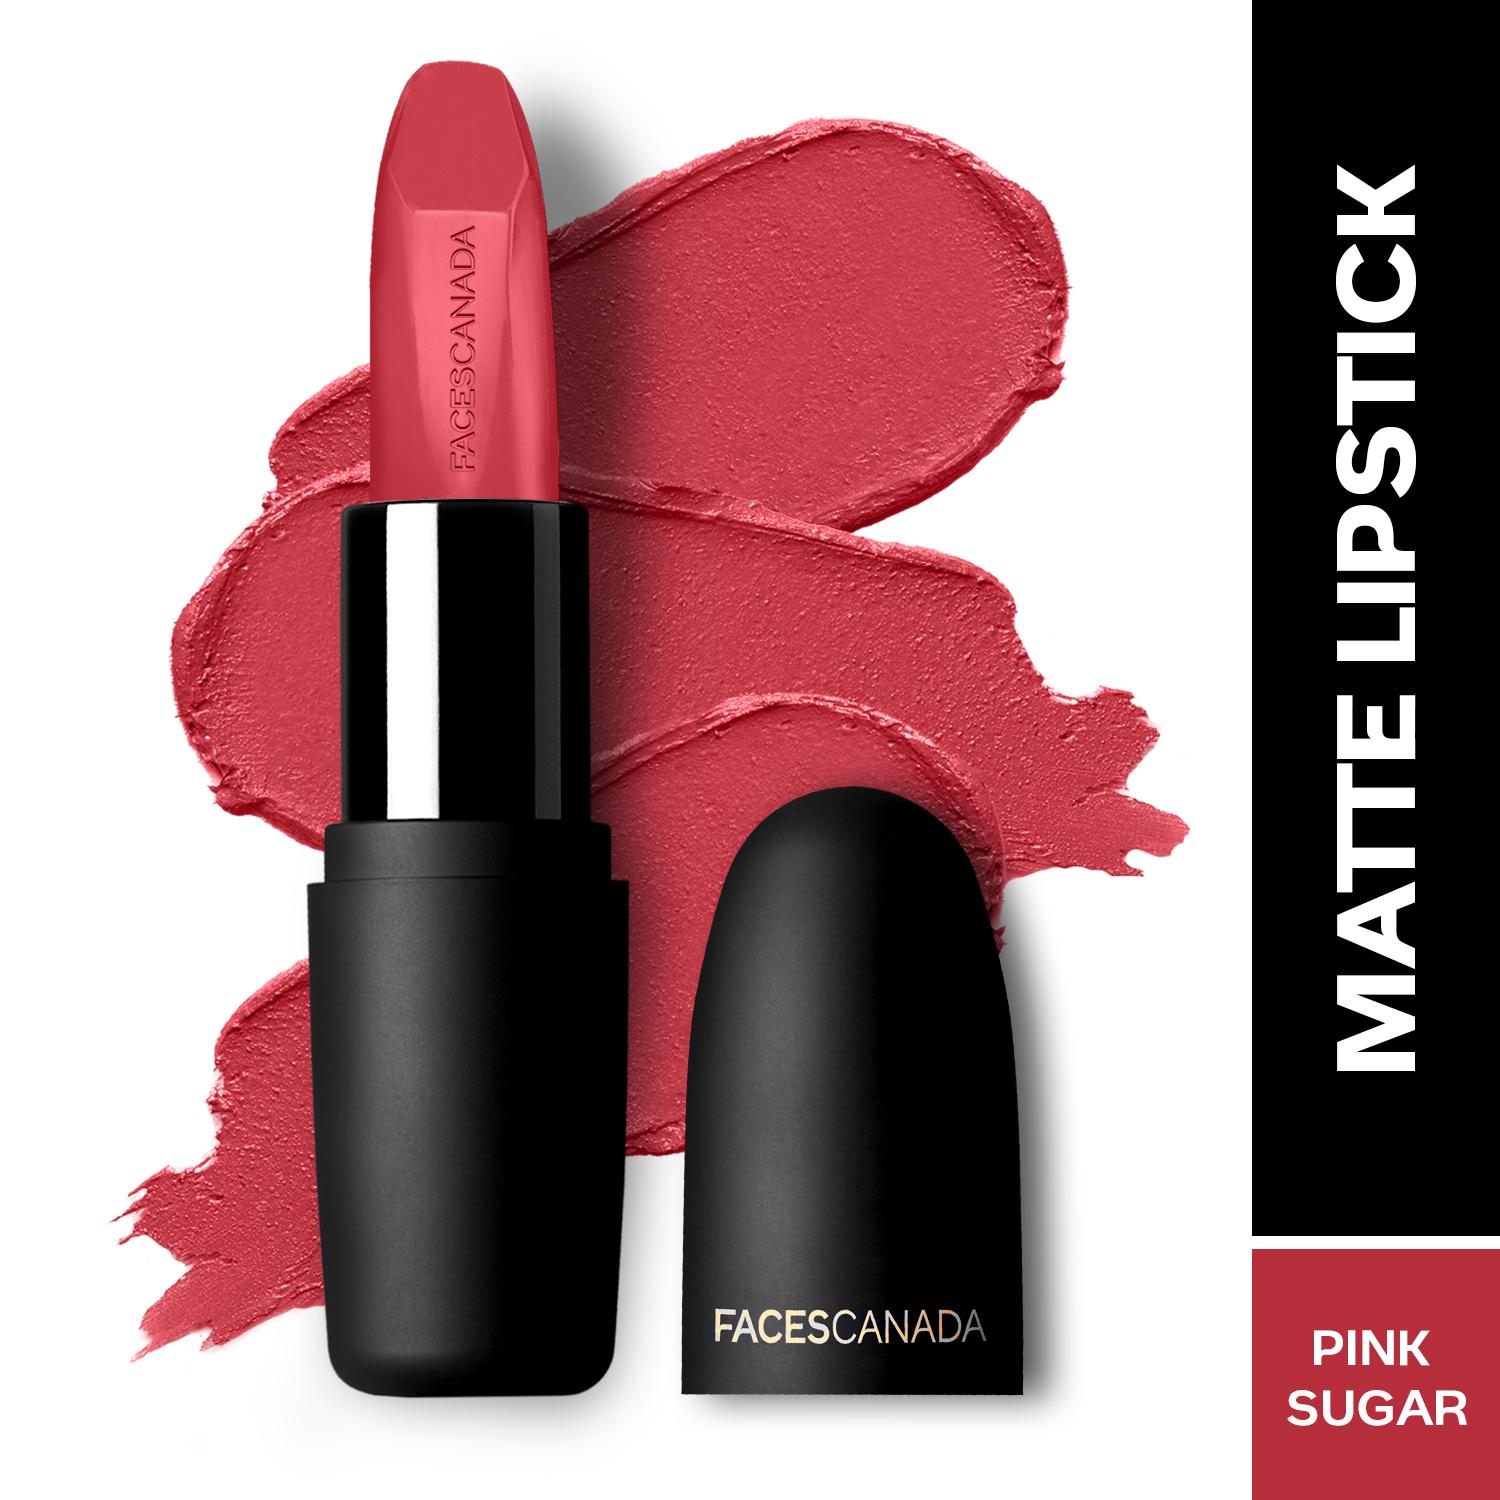 Faces Canada | Faces Canada Weightless Matte Lipstick, Pigmented and Hydrated Lips - Pink Sugar 04 (4.5 g)